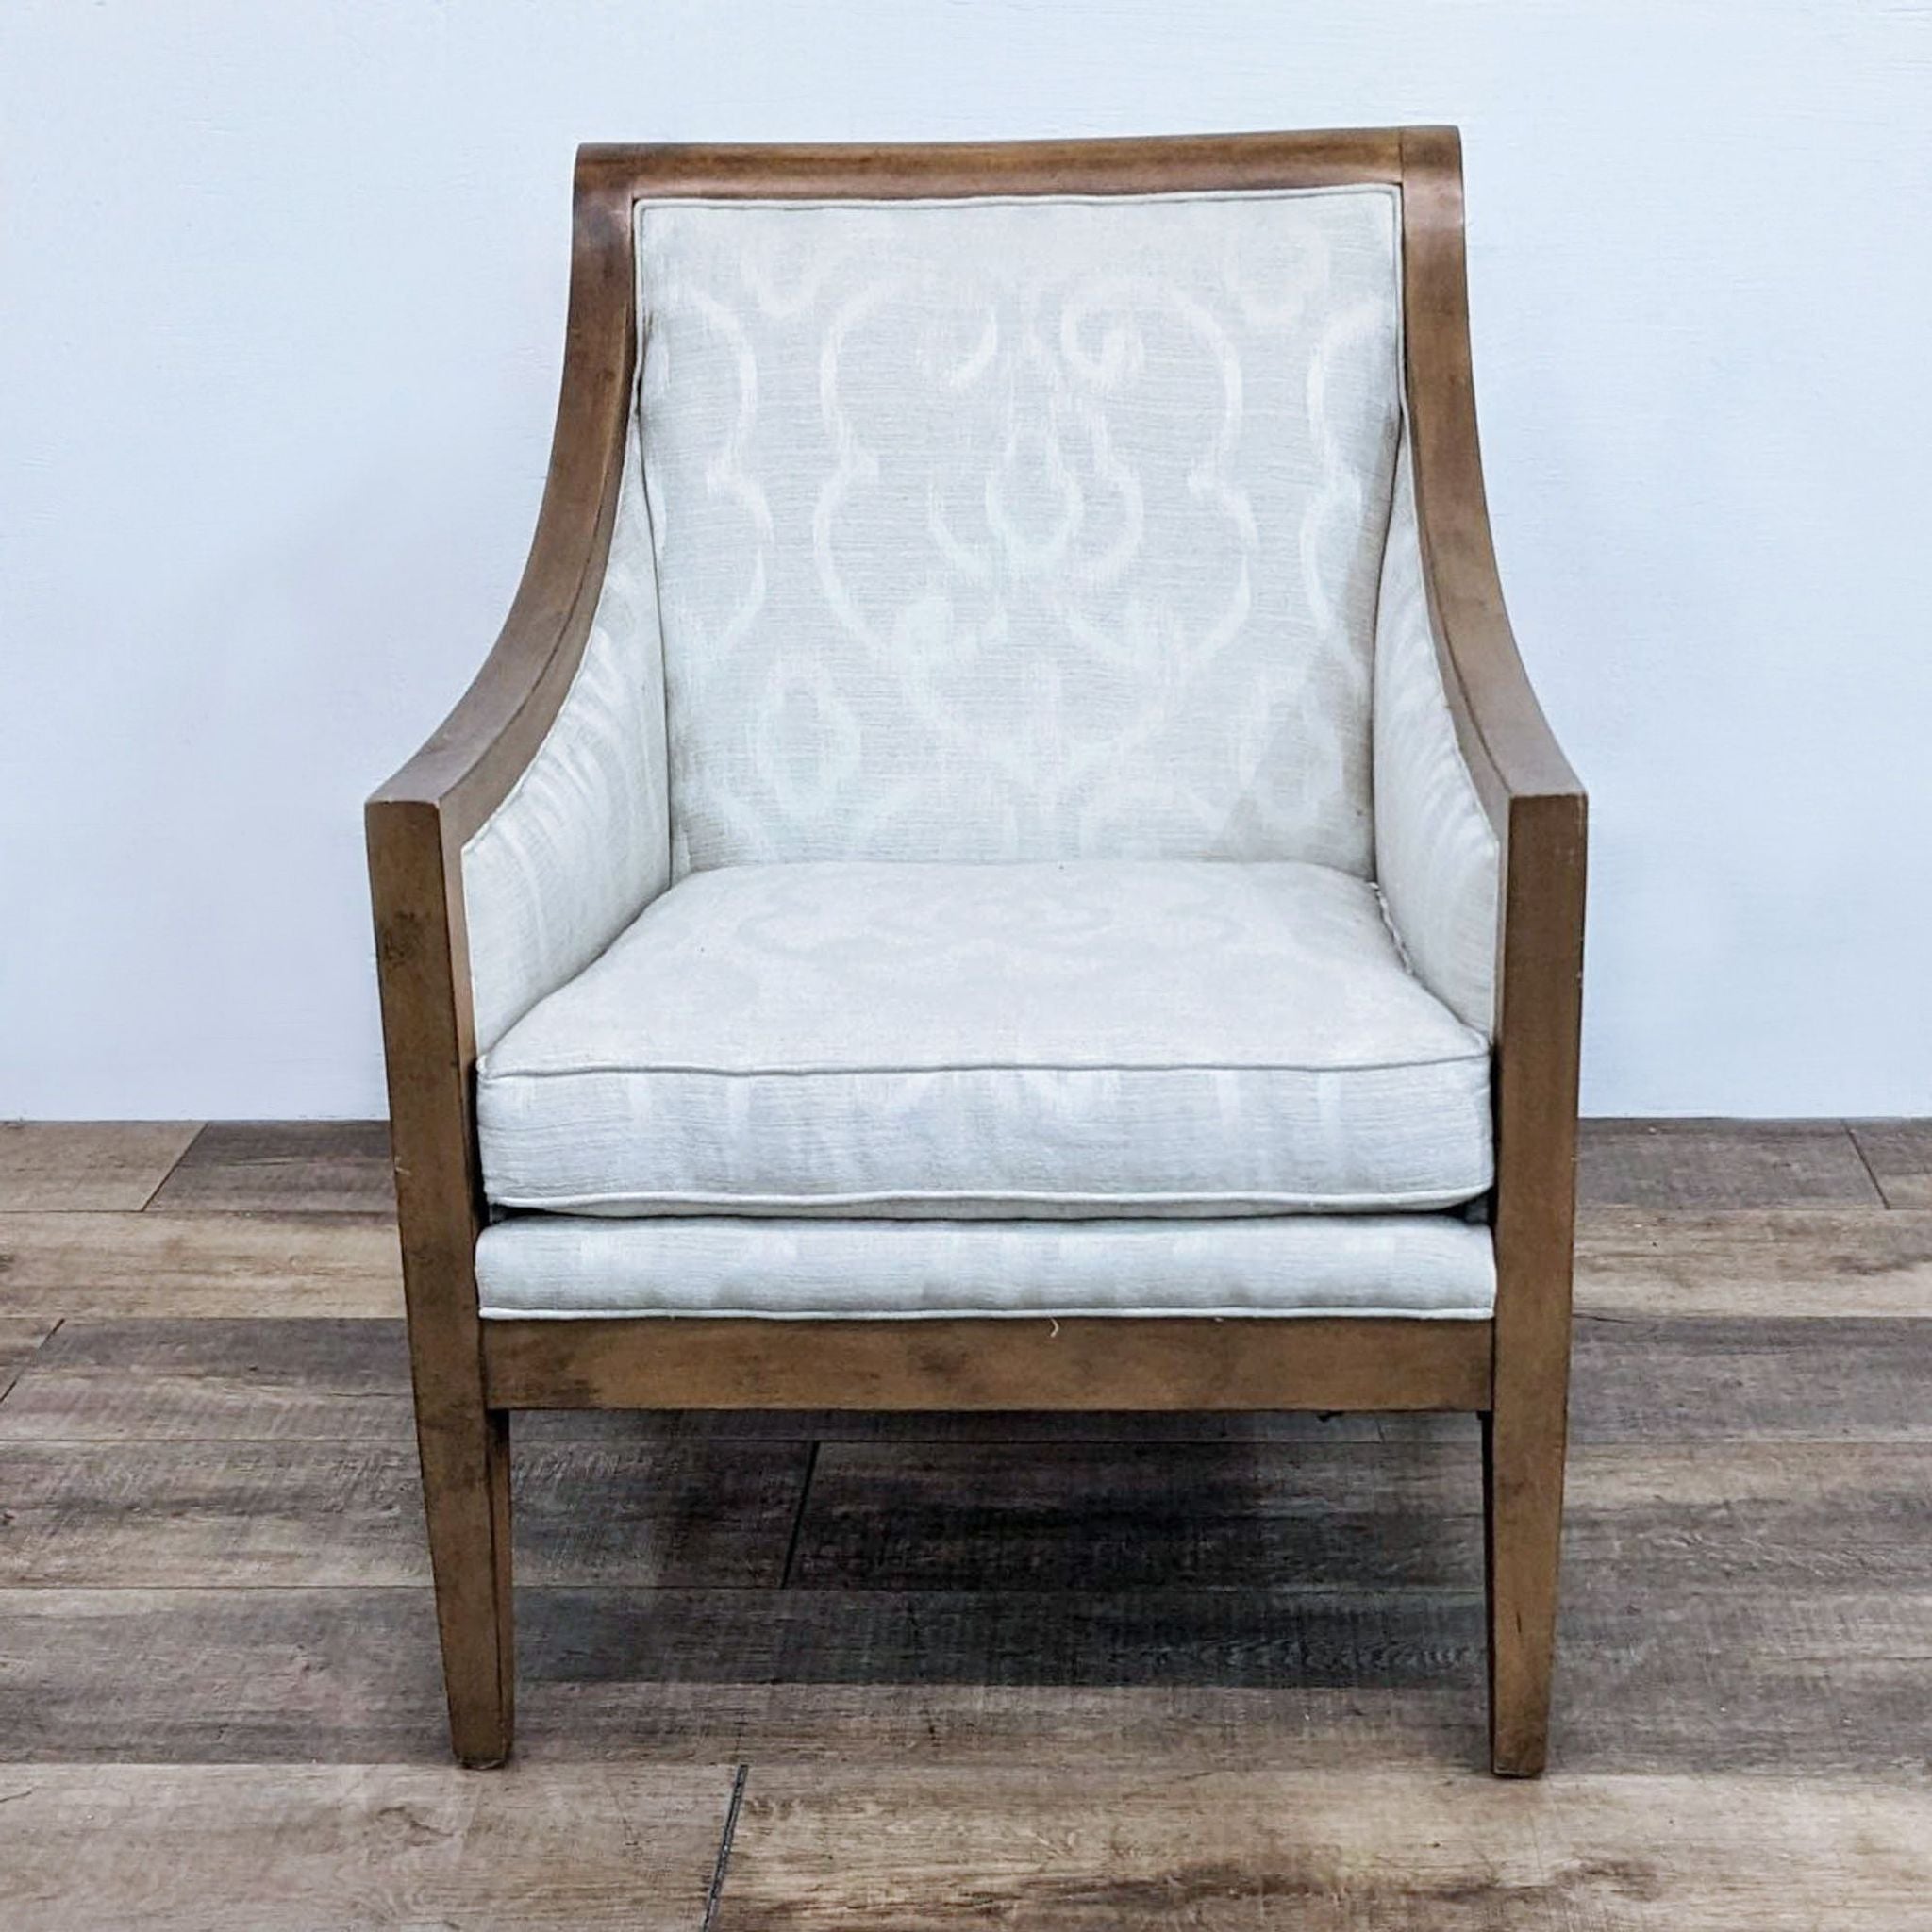 H.D. Buttercup transitional lounge chair, solid wood frame, white upholstered seat and back, removable cushion, frontal view.